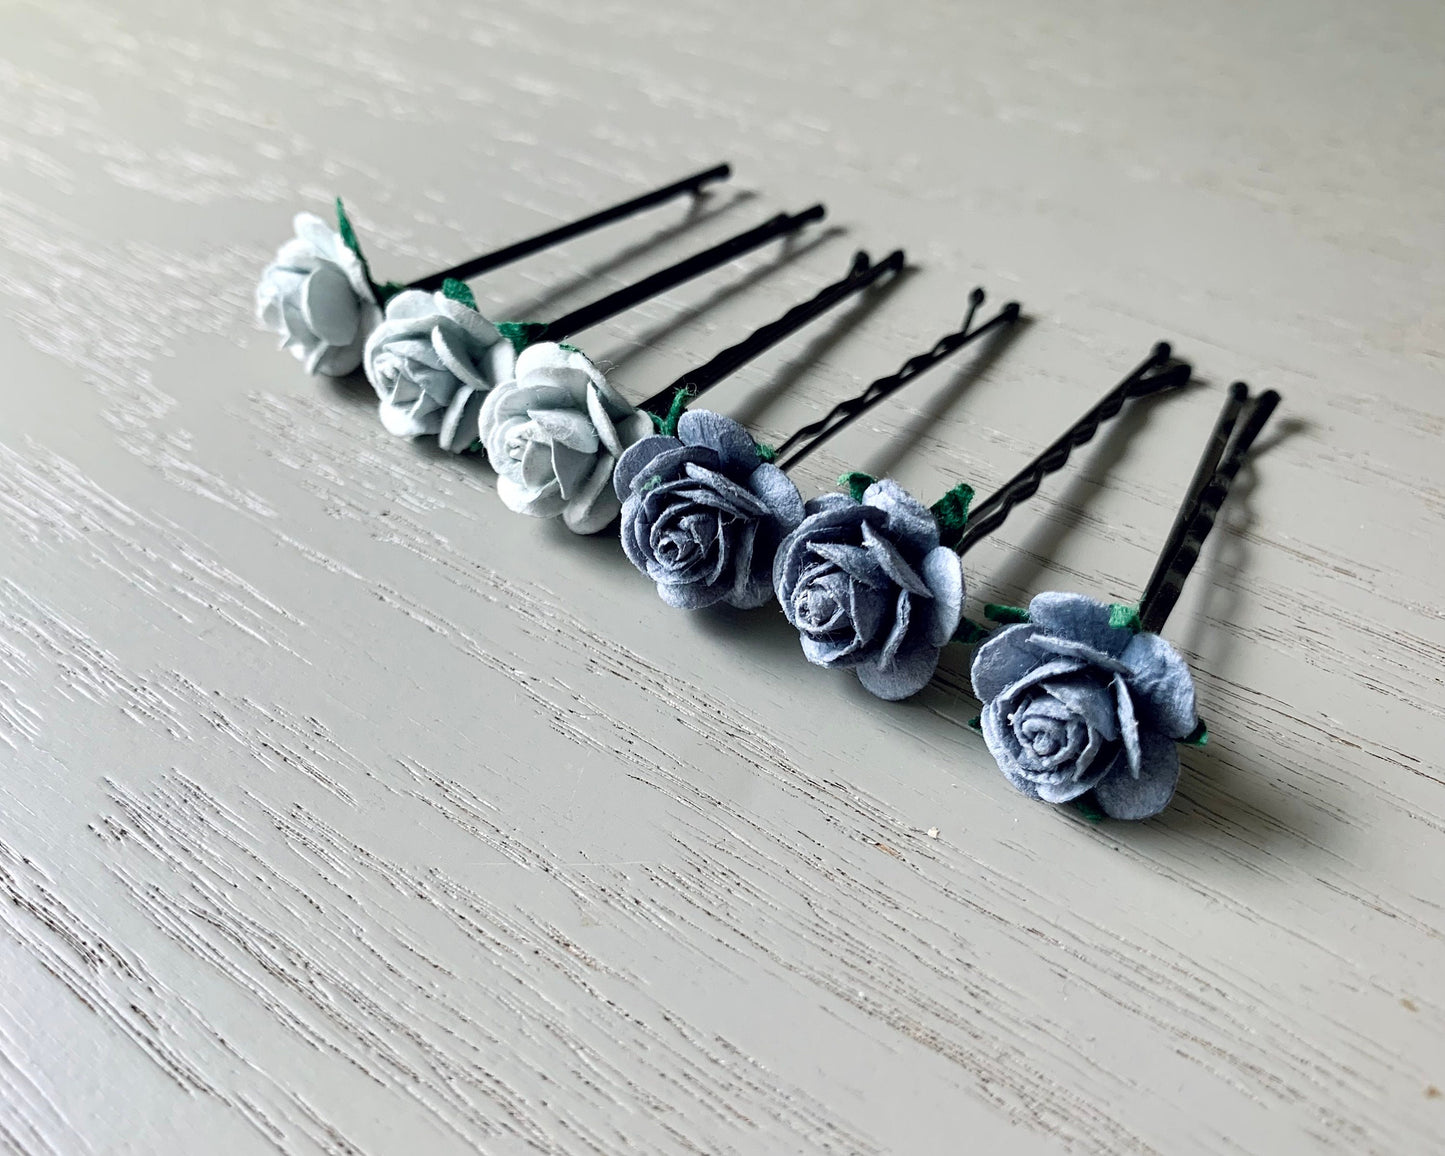 Grey Rose Hair Pin Set, 6 Paper Flower Bobby Pins in Two Tone Light and Dark Gray, Winter Bridal Hair Accessories for Floral Wedding MPR6